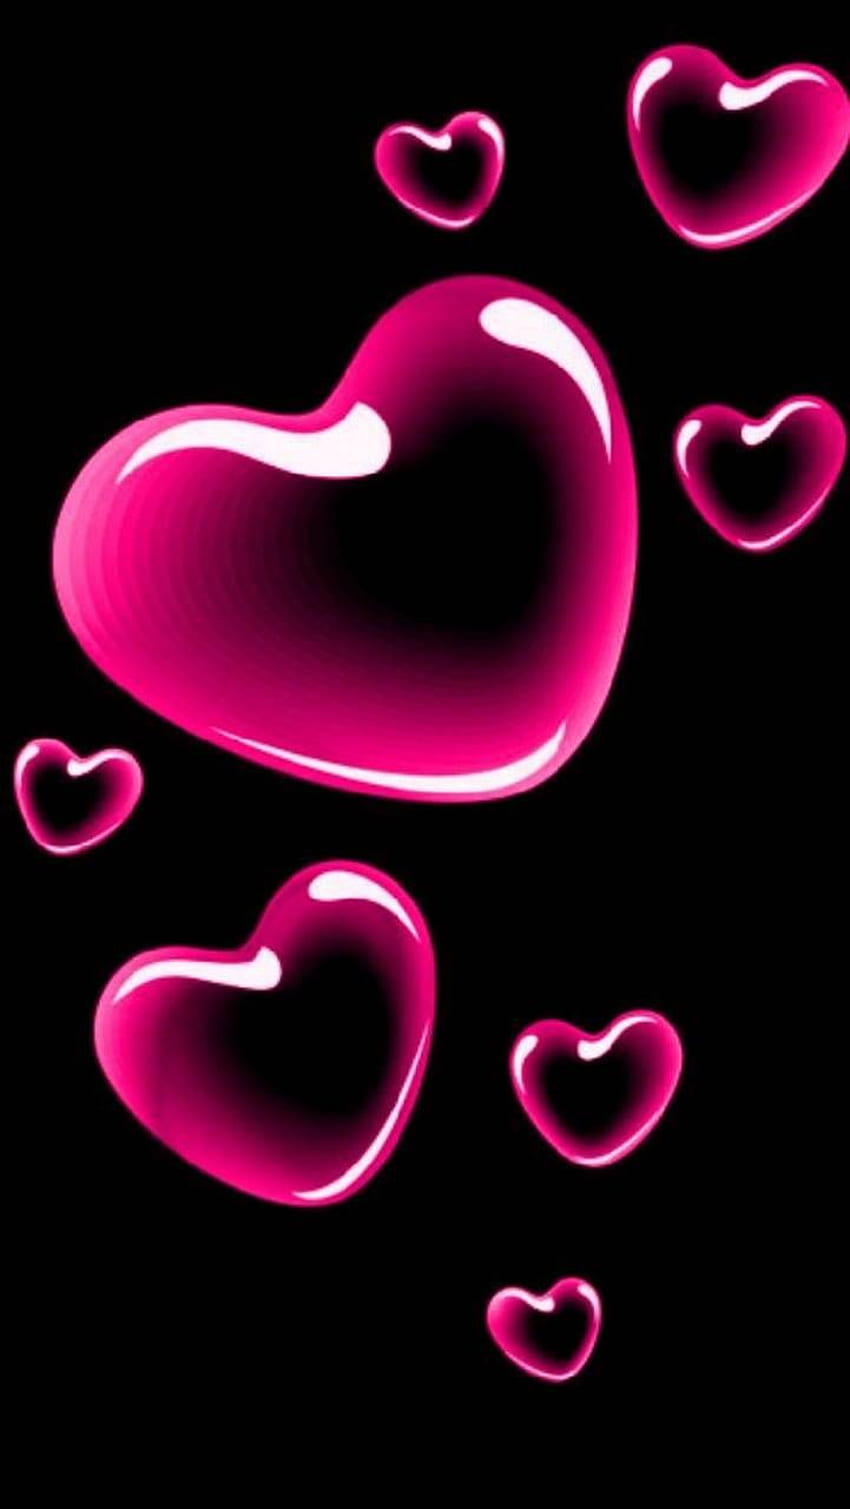 Hearts love by mirapav - 90 now. Browse millions of popula. Heart , iphone love, Love background HD phone wallpaper